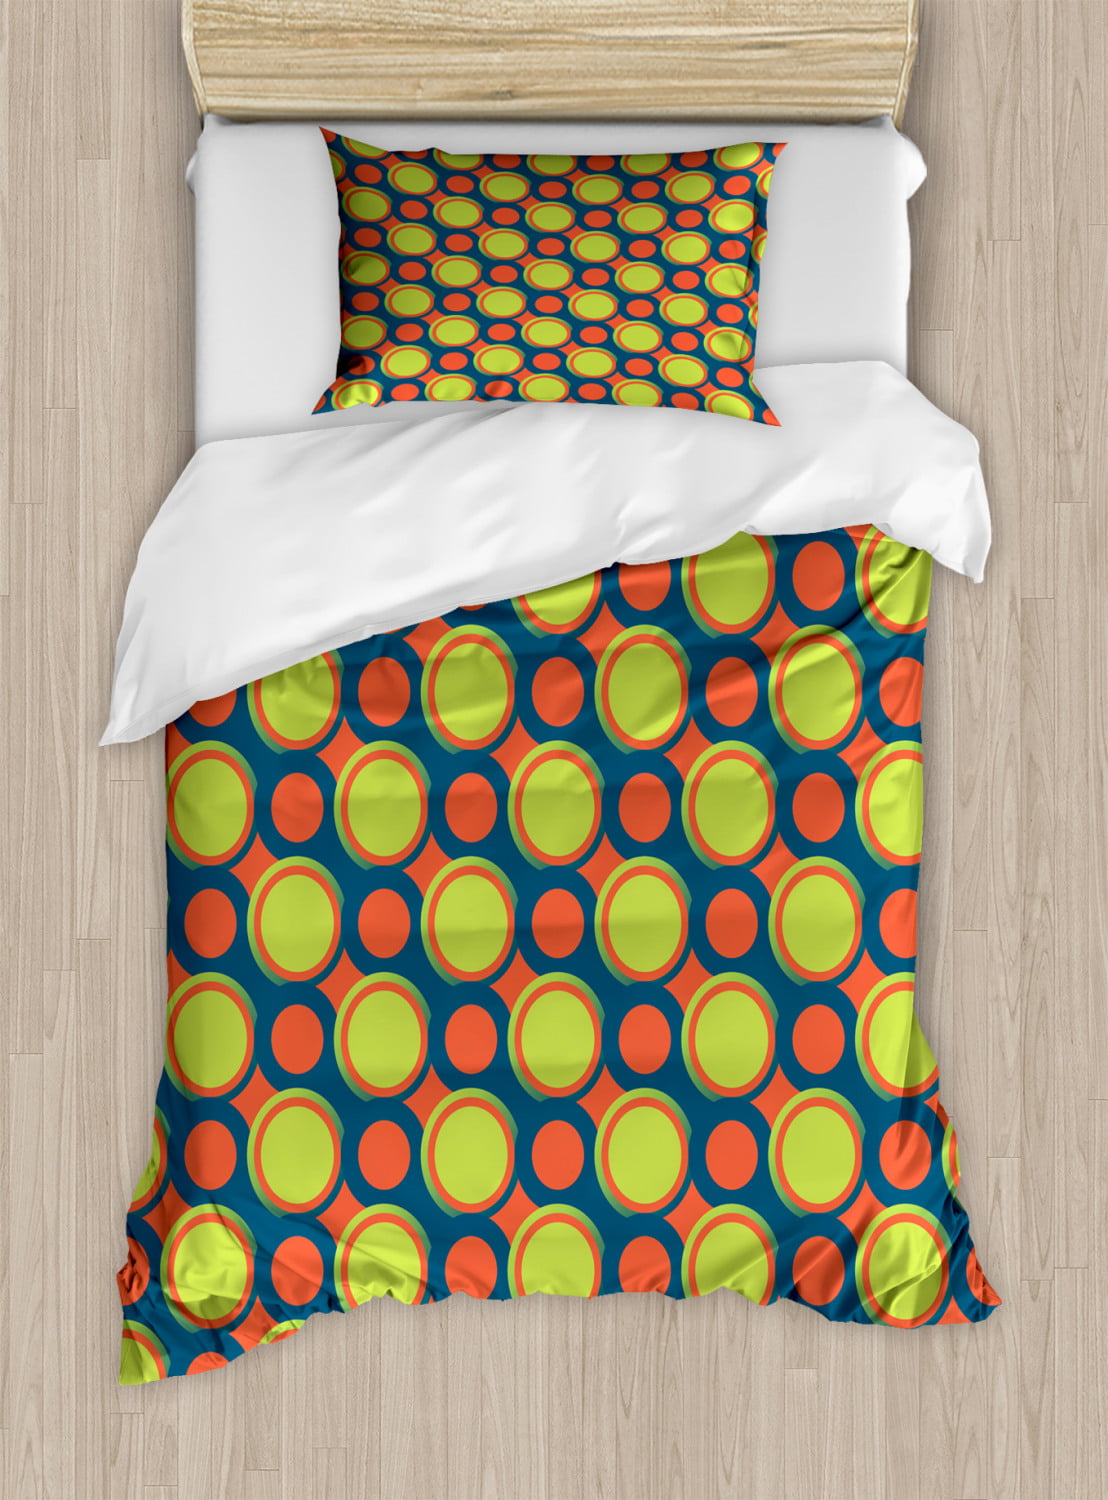 Retro Twin Size Duvet Cover Set Spotty Pattern With Orange And